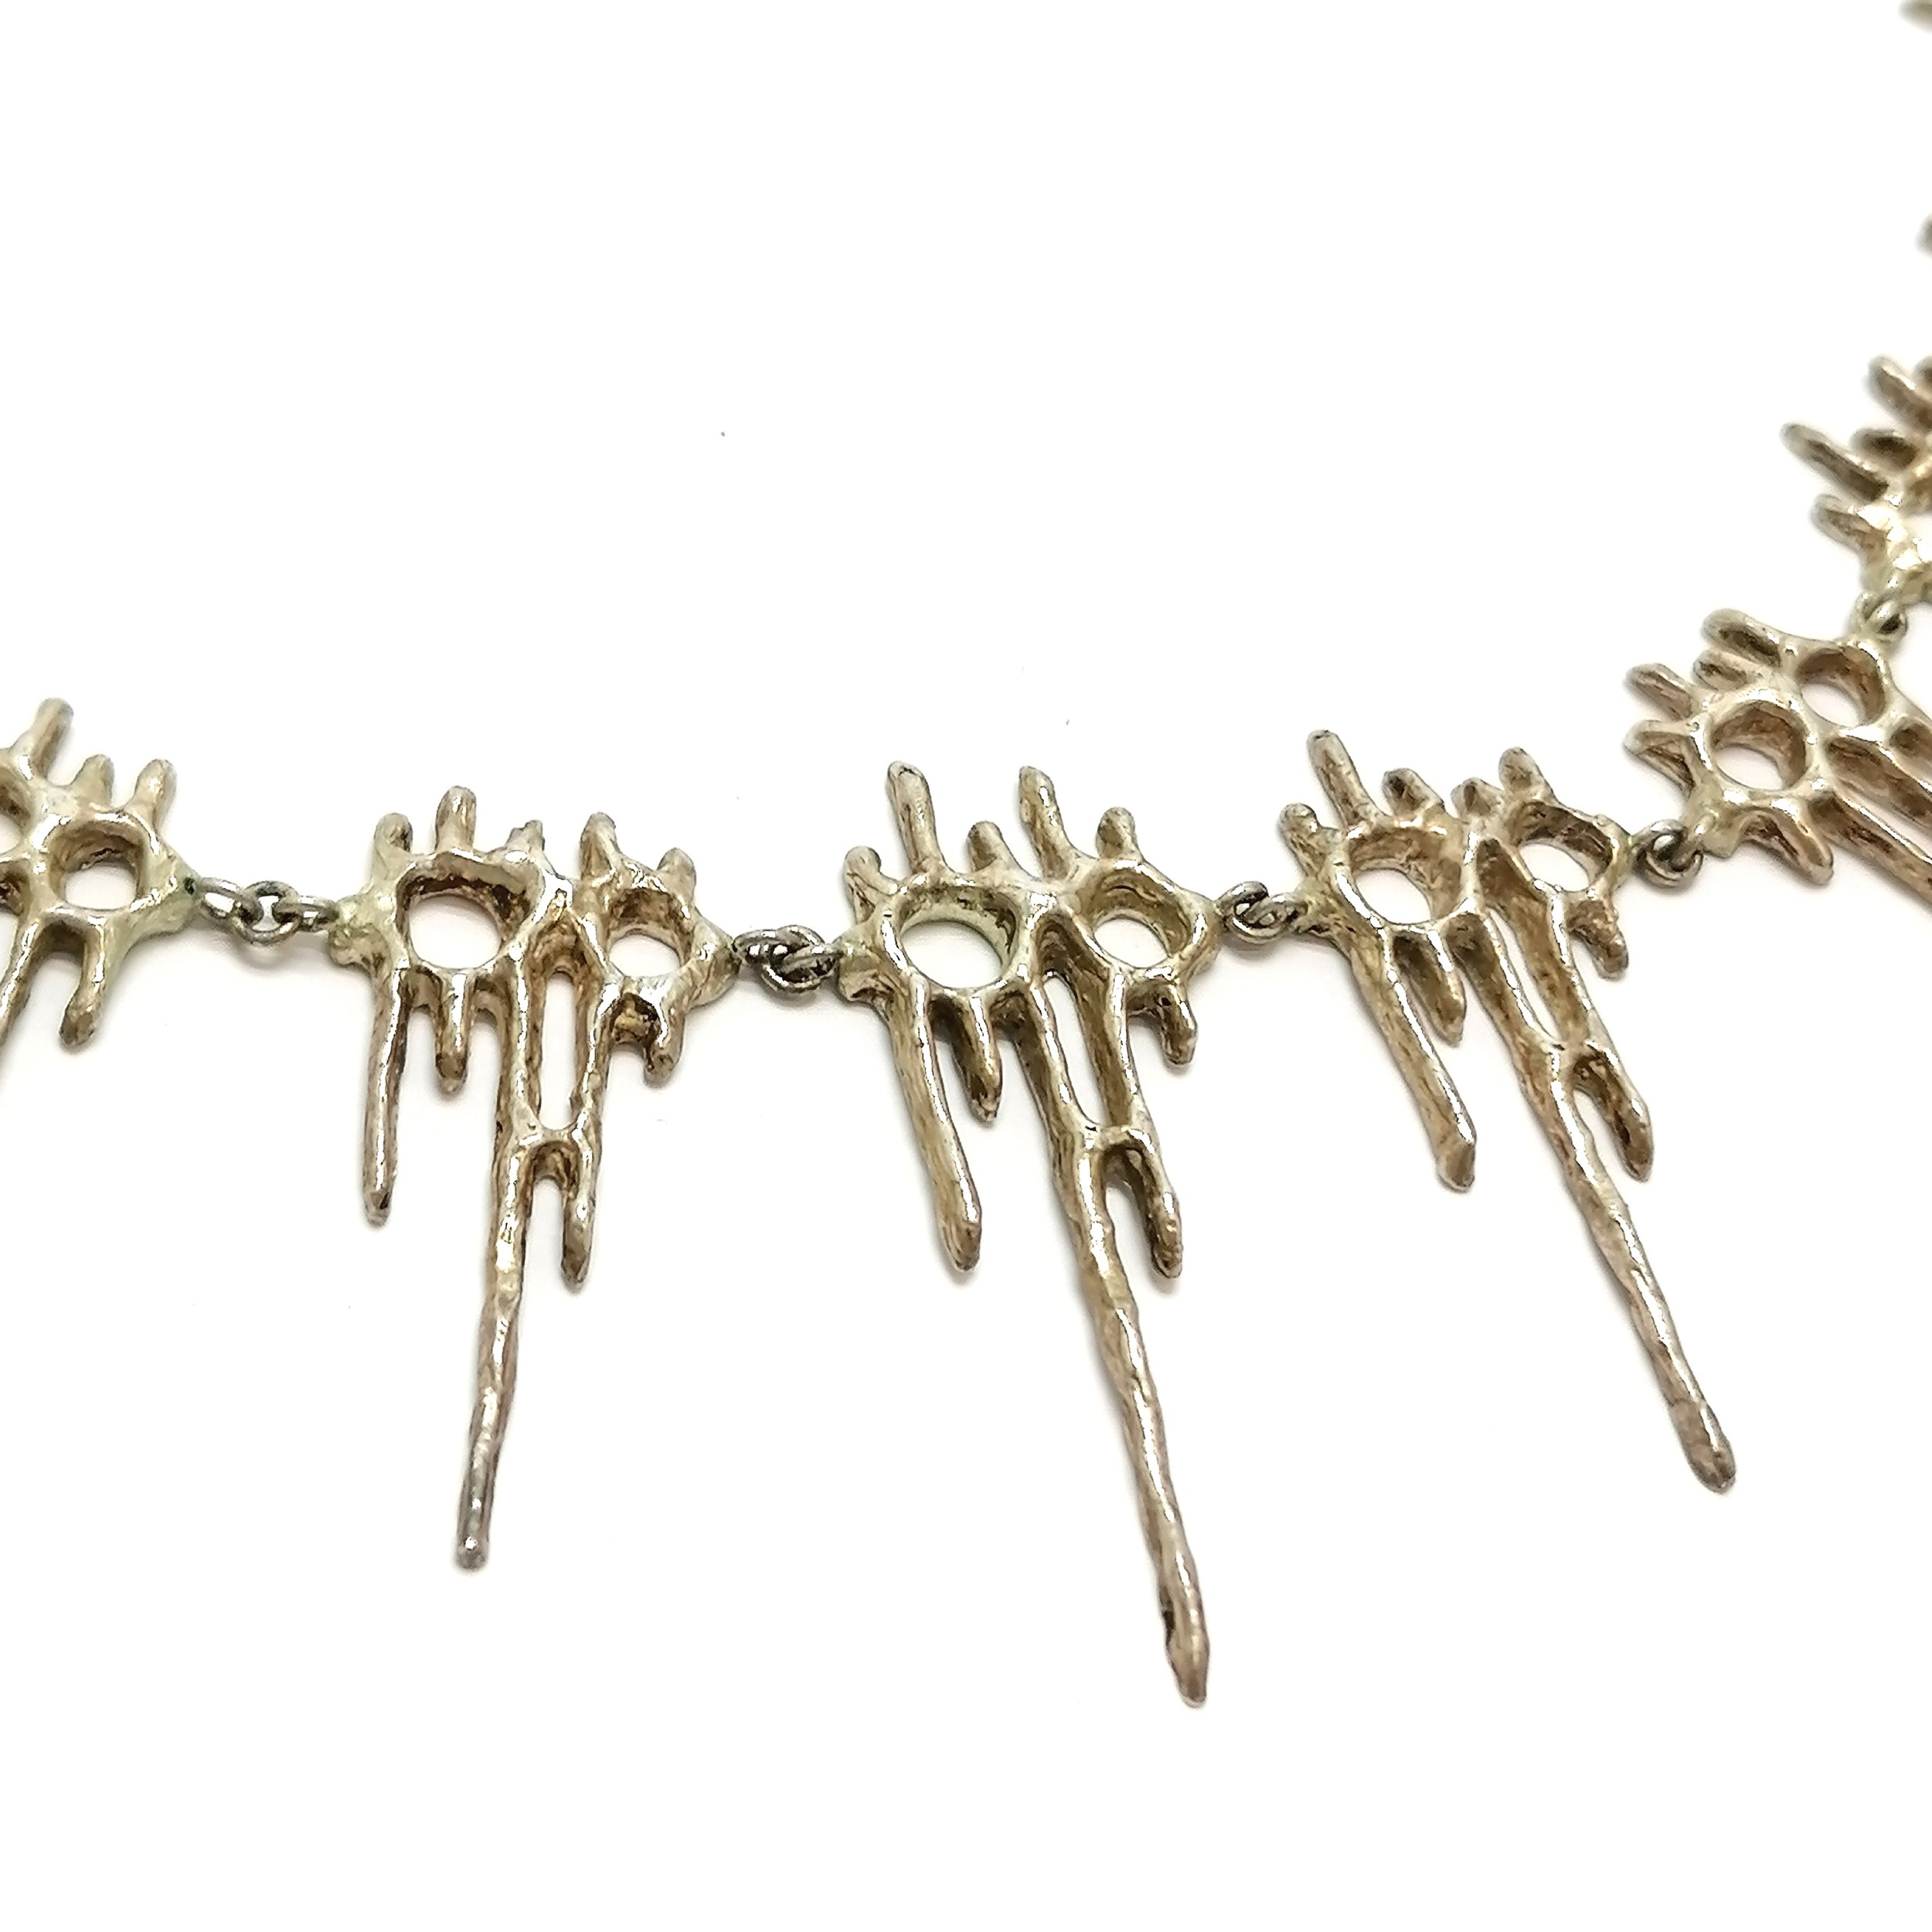 Unmarked silver Brutalist style (1970's) necklace with graduated drops - 42cm & 40g - Image 2 of 2